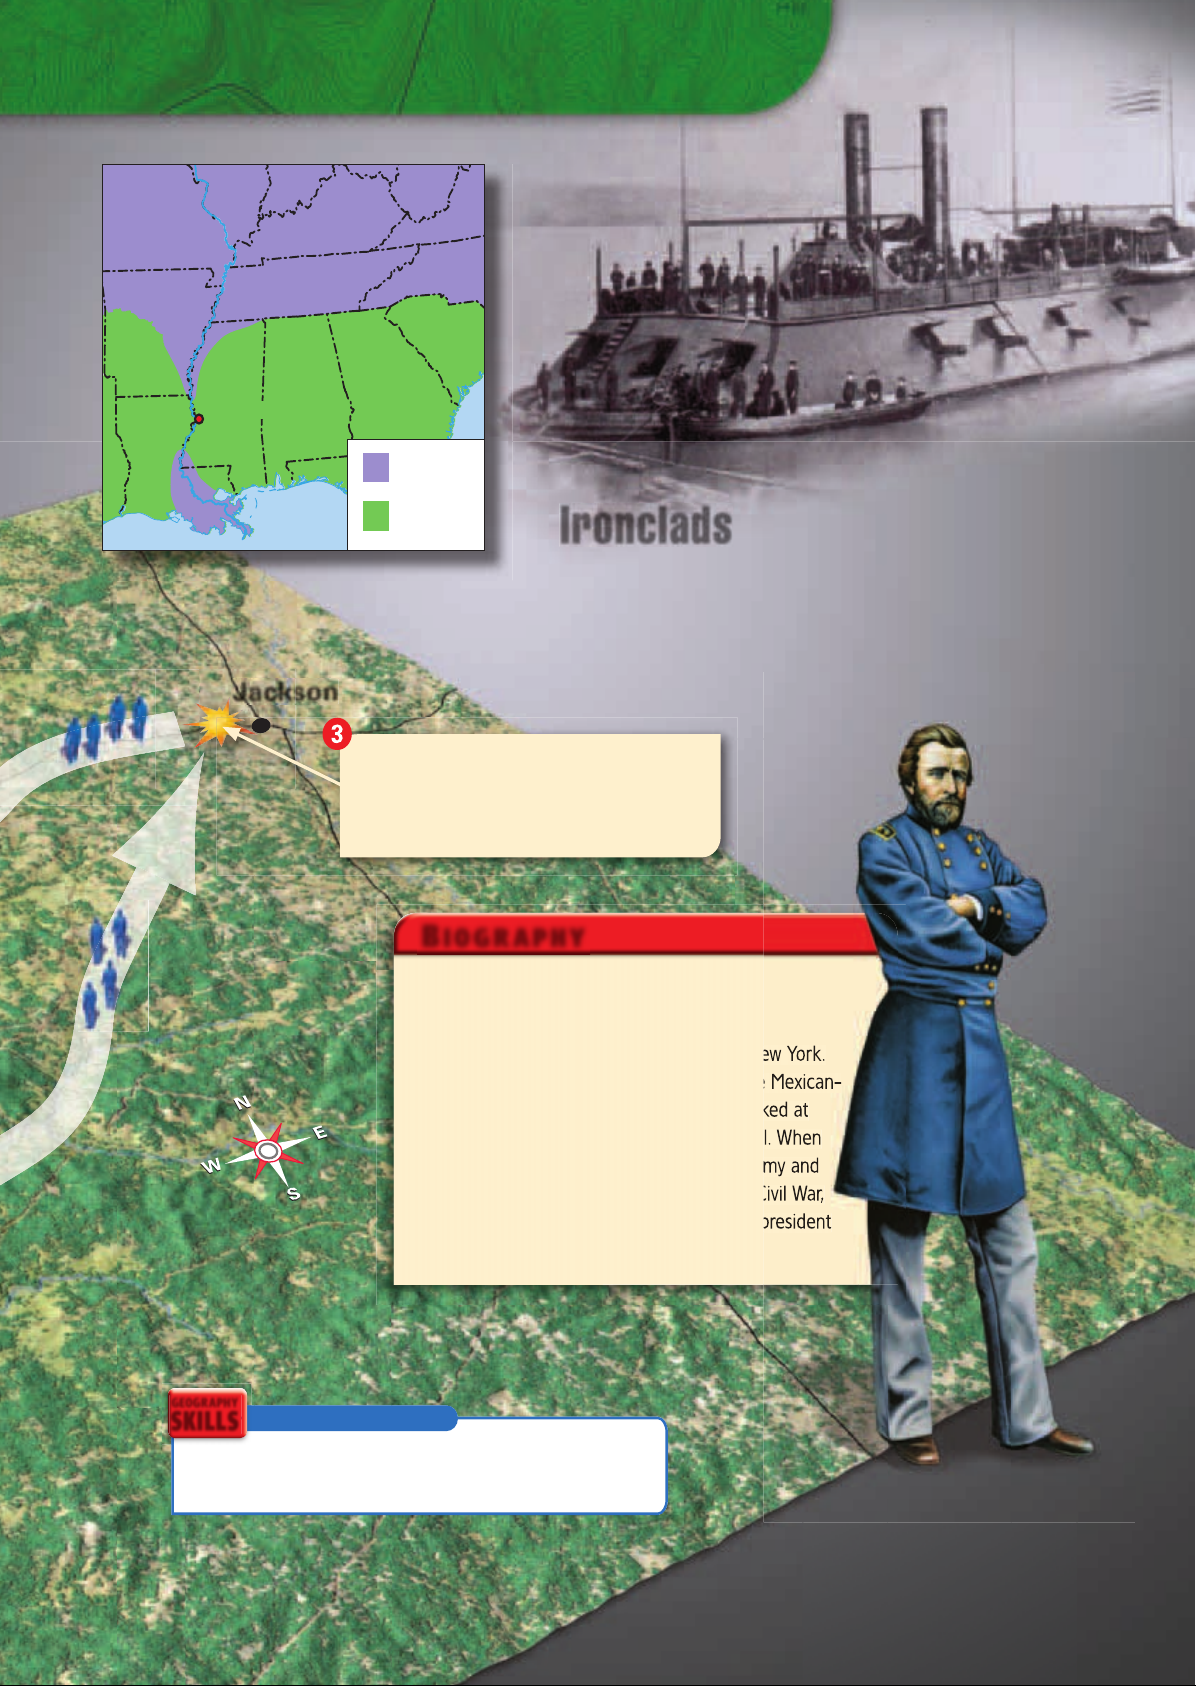 US_History_Textbook_8th_Grade_Chapter_15_The_Civil_War_h0BNFyV Image-19